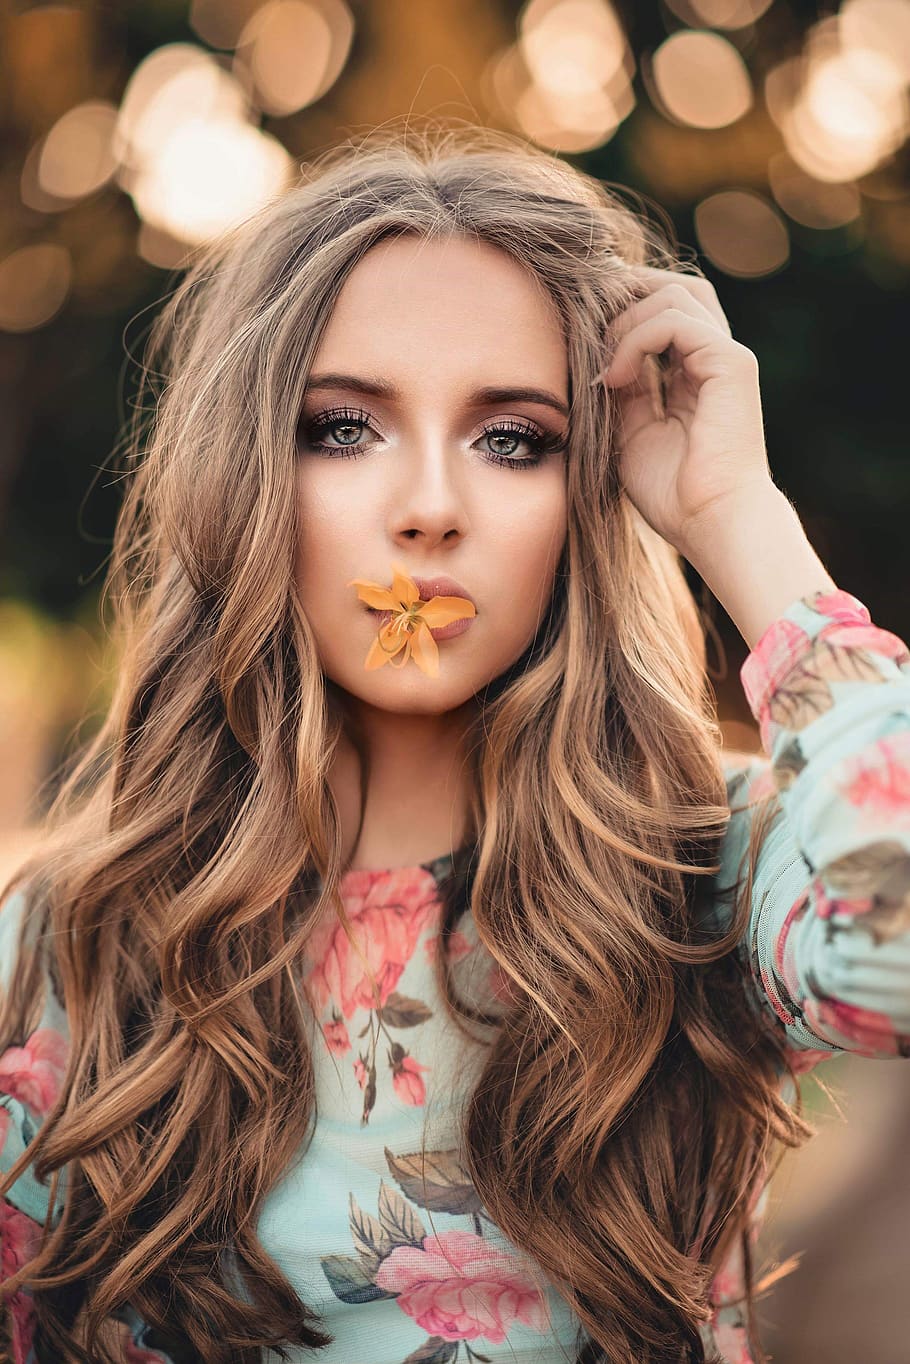 Woman With Orange Petaled Flower on Her Lips, attractive, beautiful